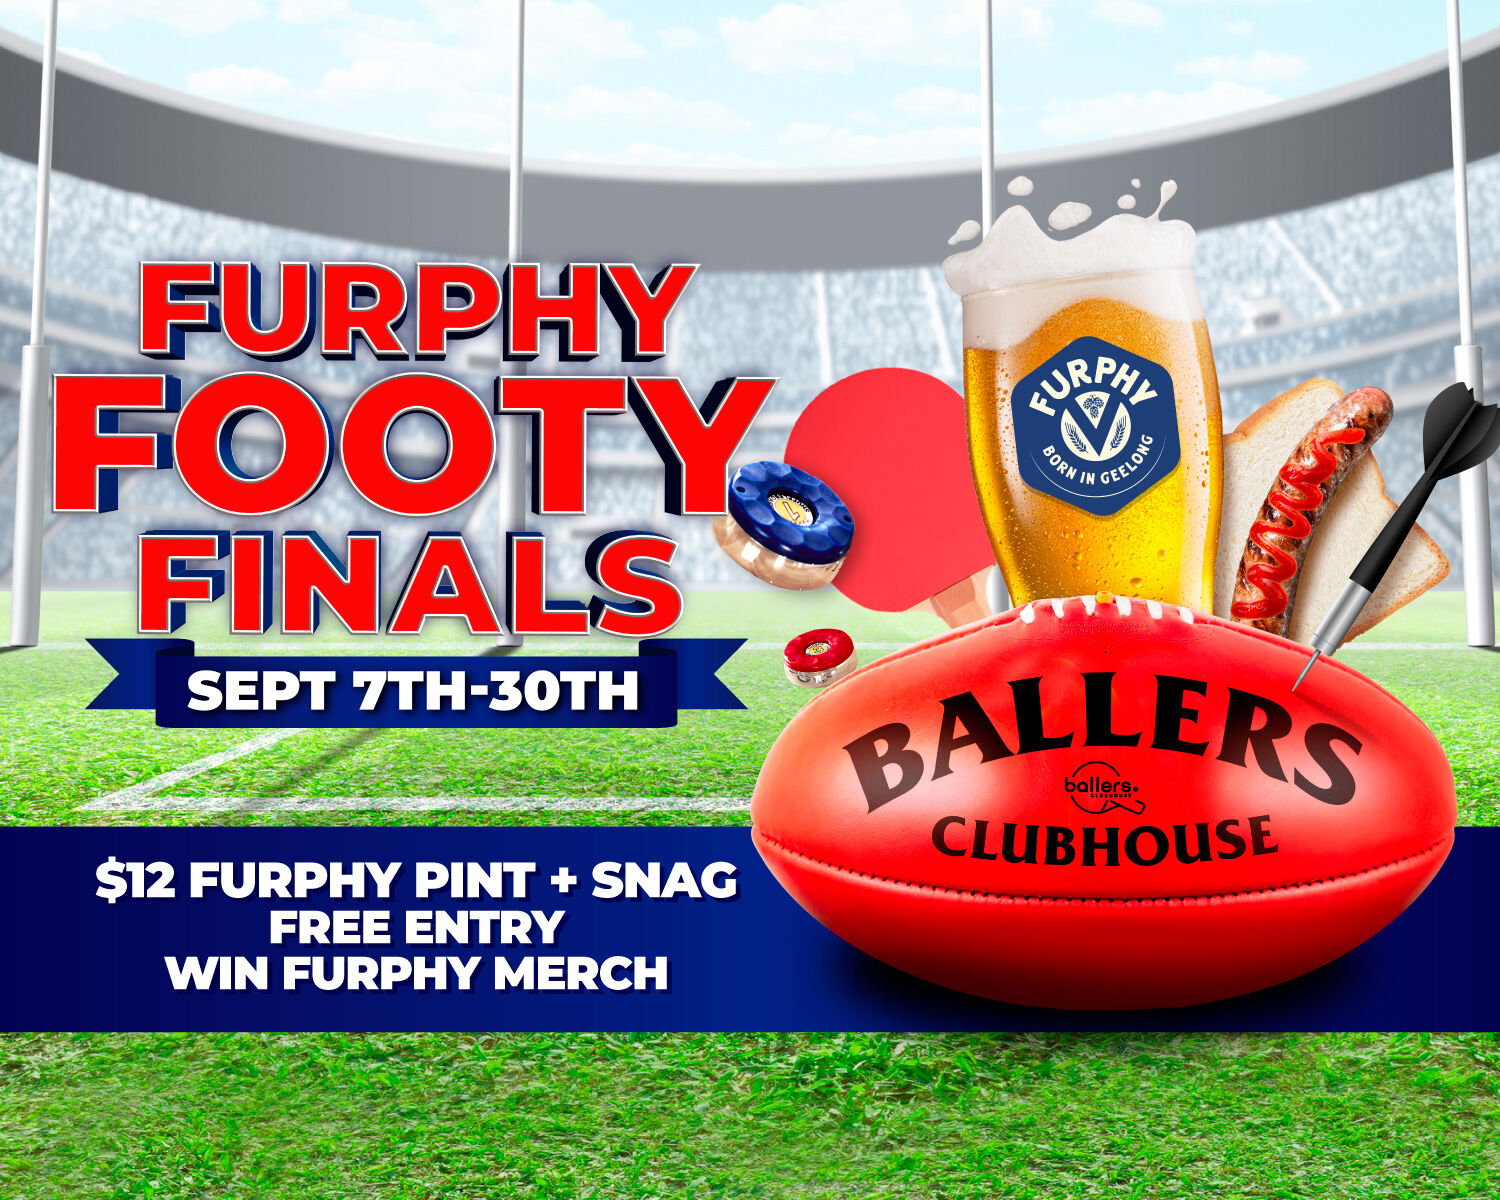 Grand Final Series Viewing Party | FURPHY FOOTY FINALS | Win Prizes, cheap drinks | Watch the grand final at Ballers Clubhouse